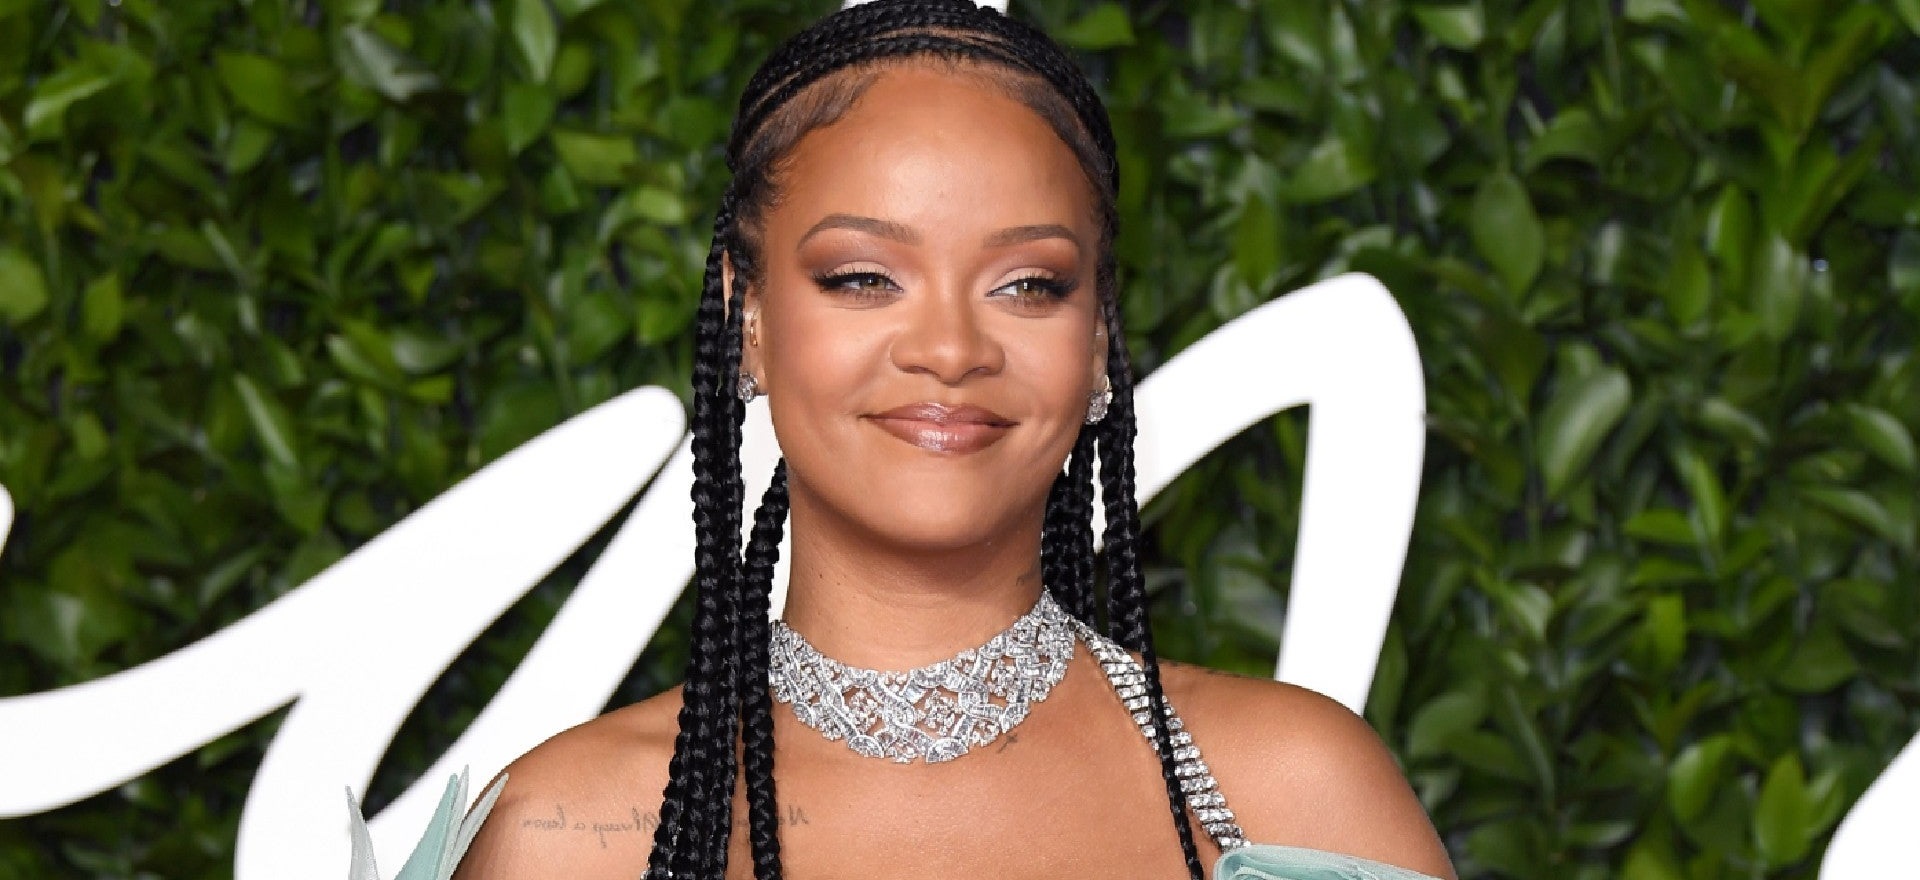 She’s Back! Rihanna Ends 7-Year Musical Hiatus With Theme Song For Black Panther, Ahead Of NEW Album Announcement